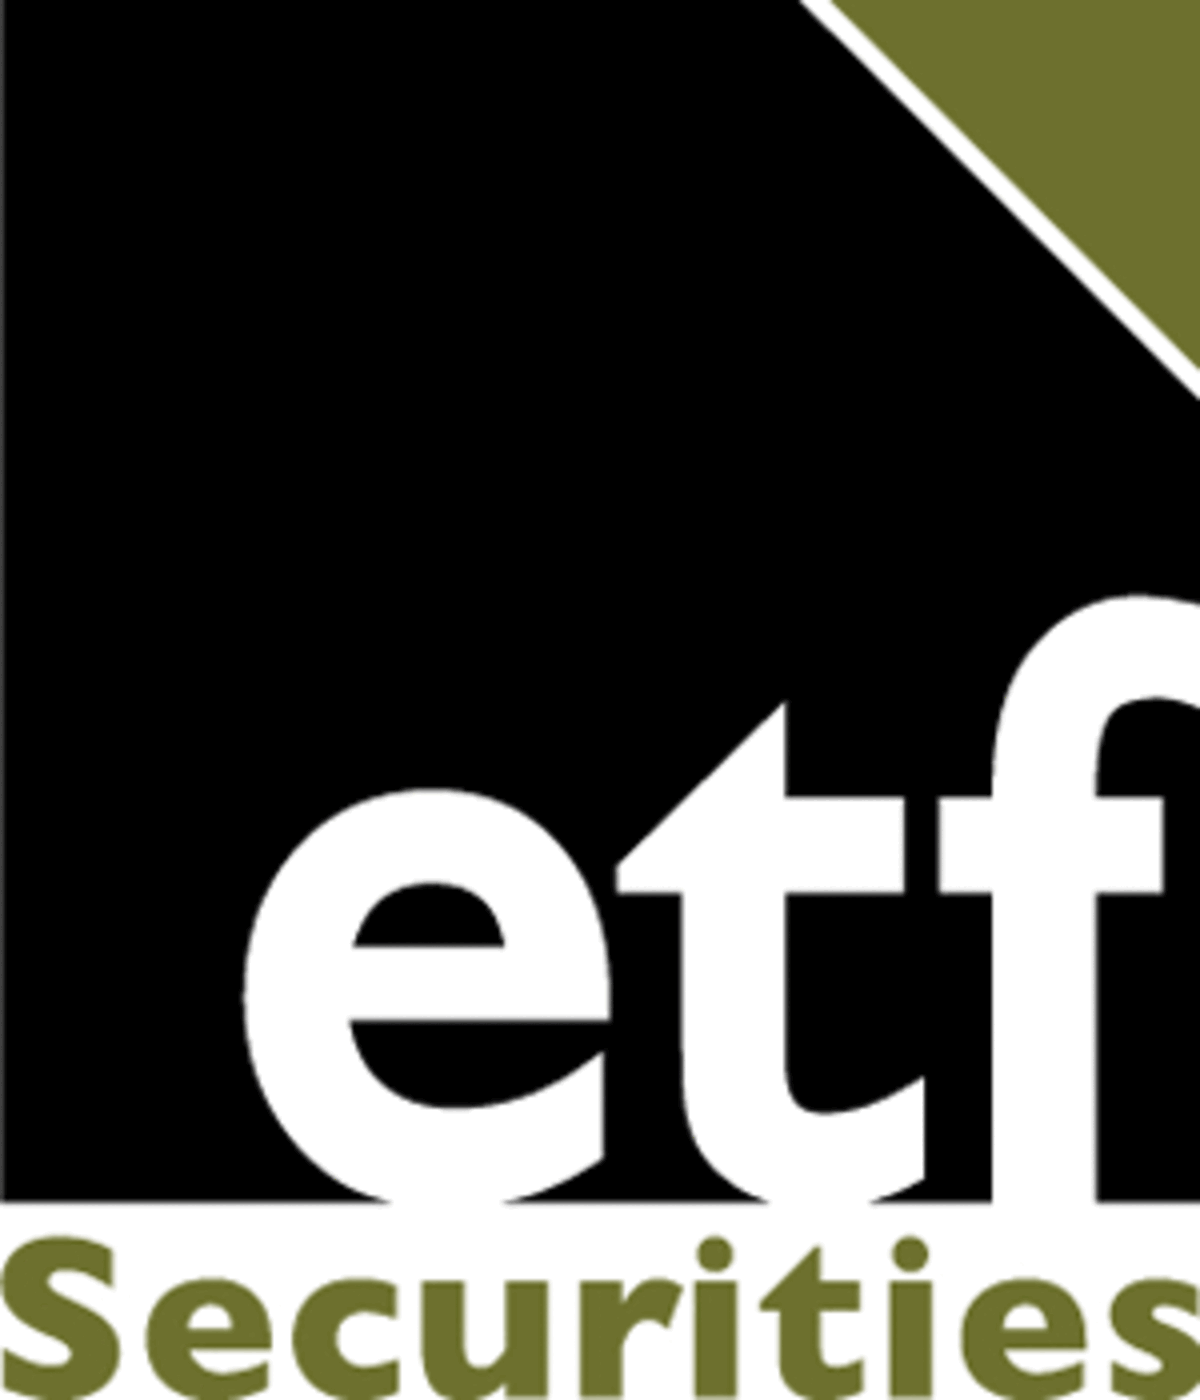 ETF Securities partnered with E Fund, one of China’s largest asset management companies, to launch Europe’s first physically replicated UCITS exchange traded fund (ETF) tracking the MSCI China A Index. ”ETFS-E Fund MSCI China A GO UCITS ETF” is denominated in EUR and listed on Euronext Paris as of today. ETF Securities launches first ETF on MSCI China A with physical replication on Euronext Paris